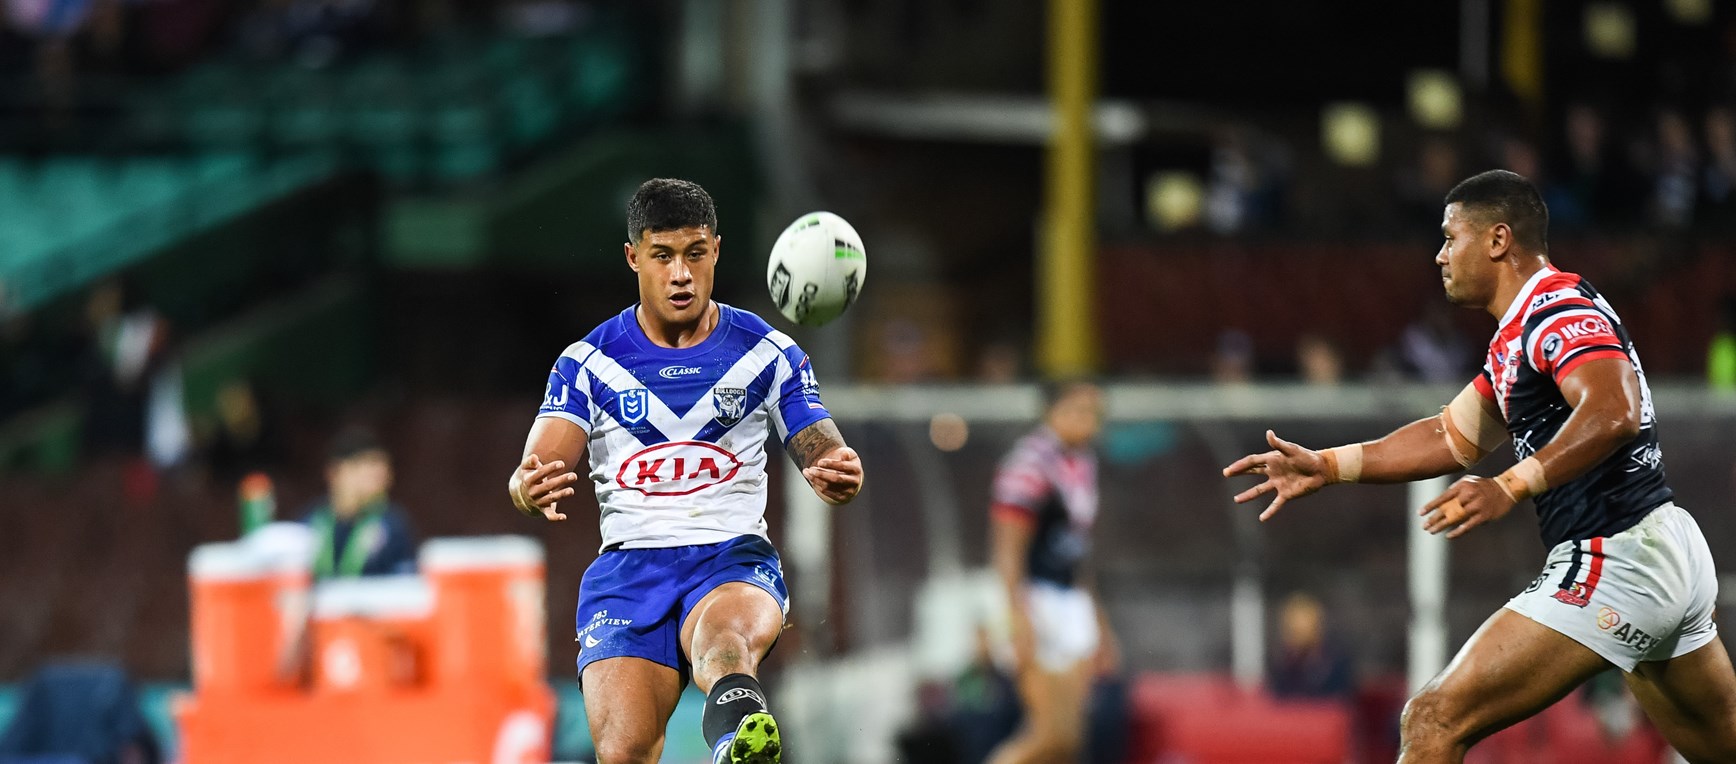 GALLERY: Round 14 v Roosters